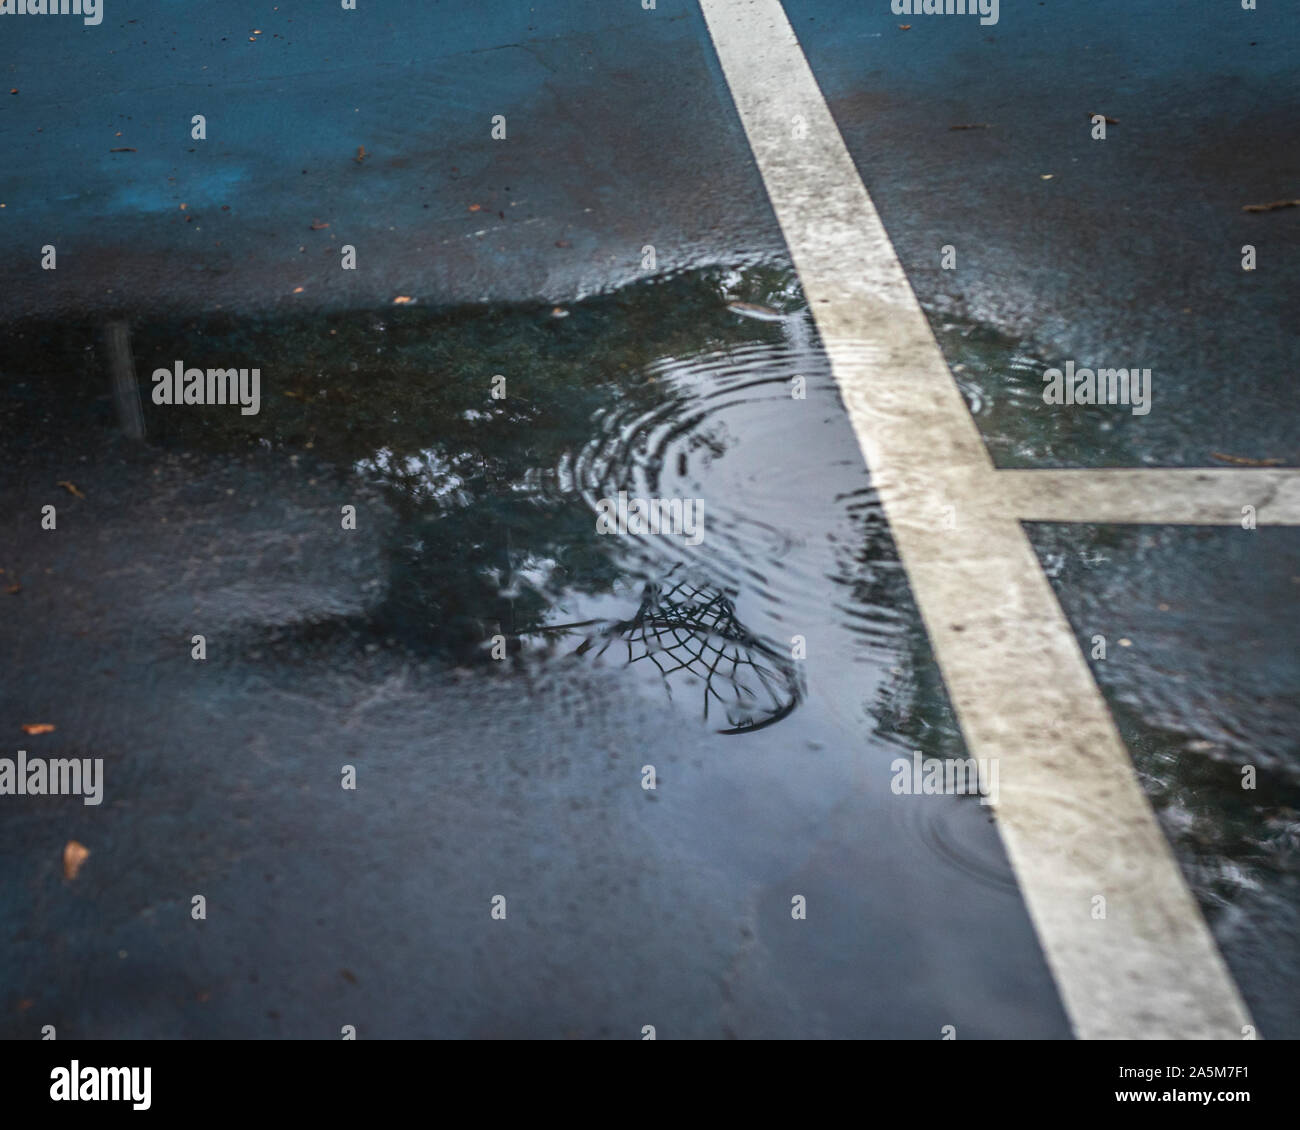 Reflection of basket ball goal in puddle on a rainy day Stock Photo